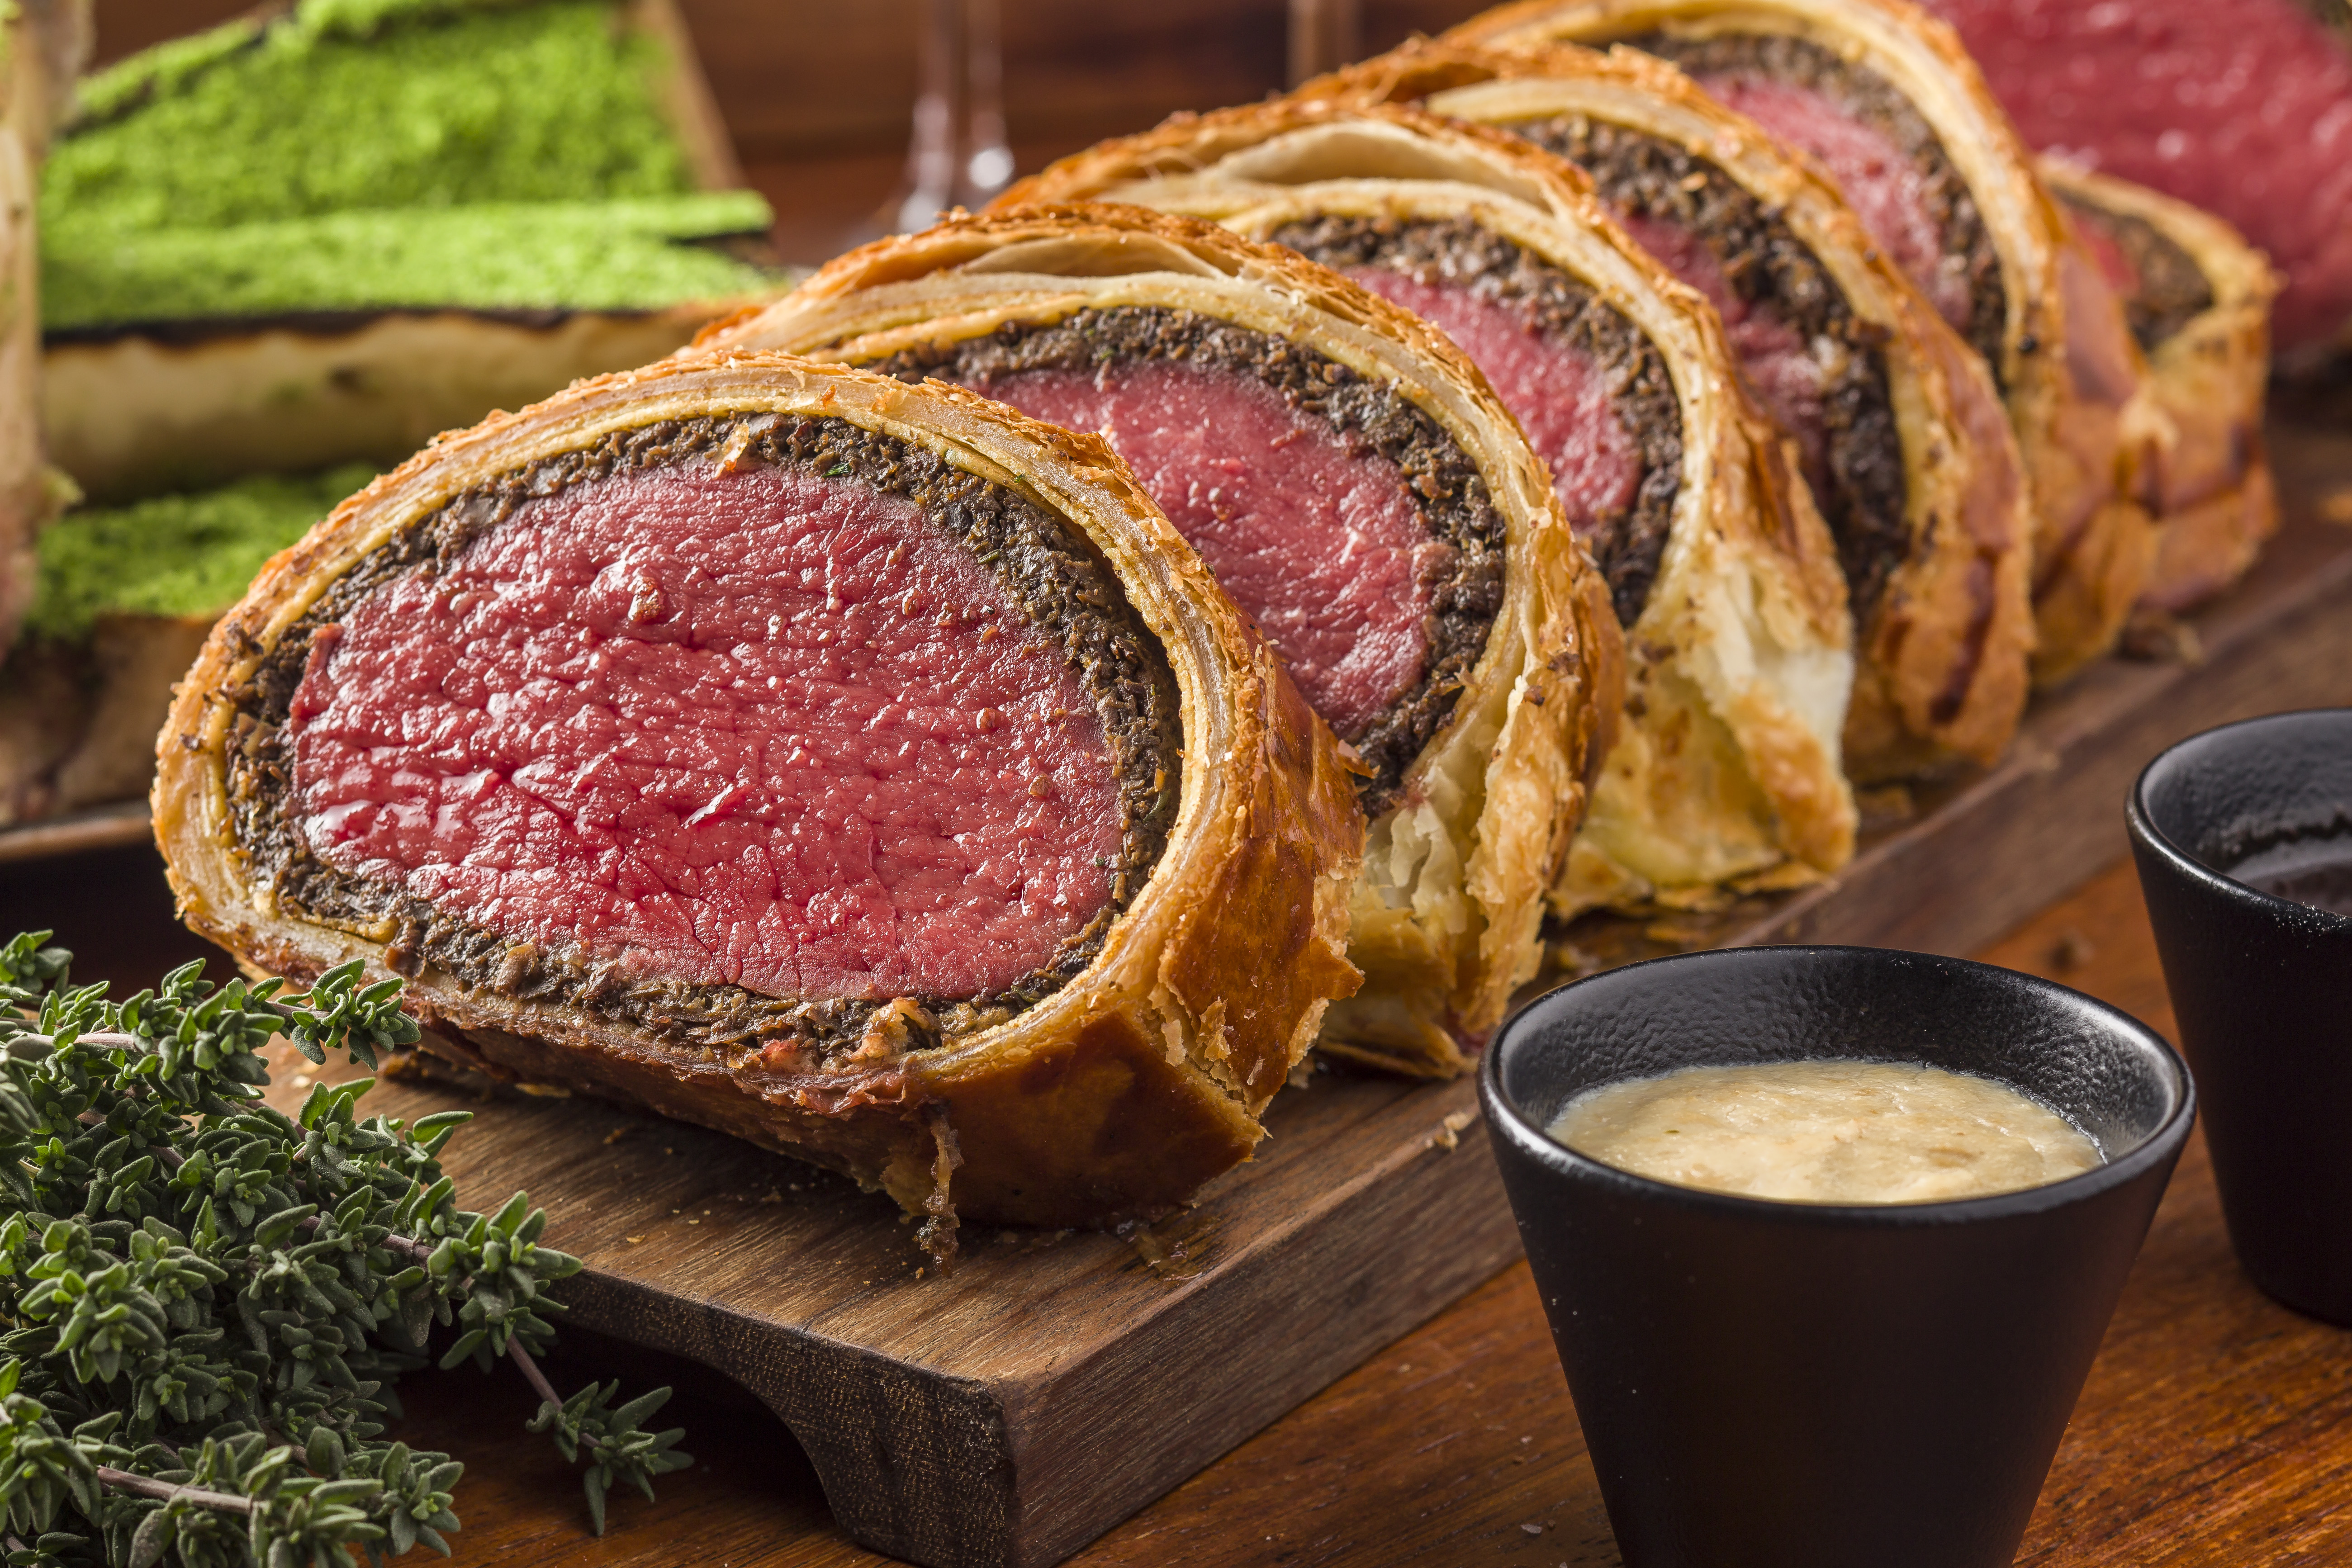 Learn how to make succulent Beef Wellington at Bread Street Kitchen and Bar at the Beef Wellington Masterclass on 13 January.